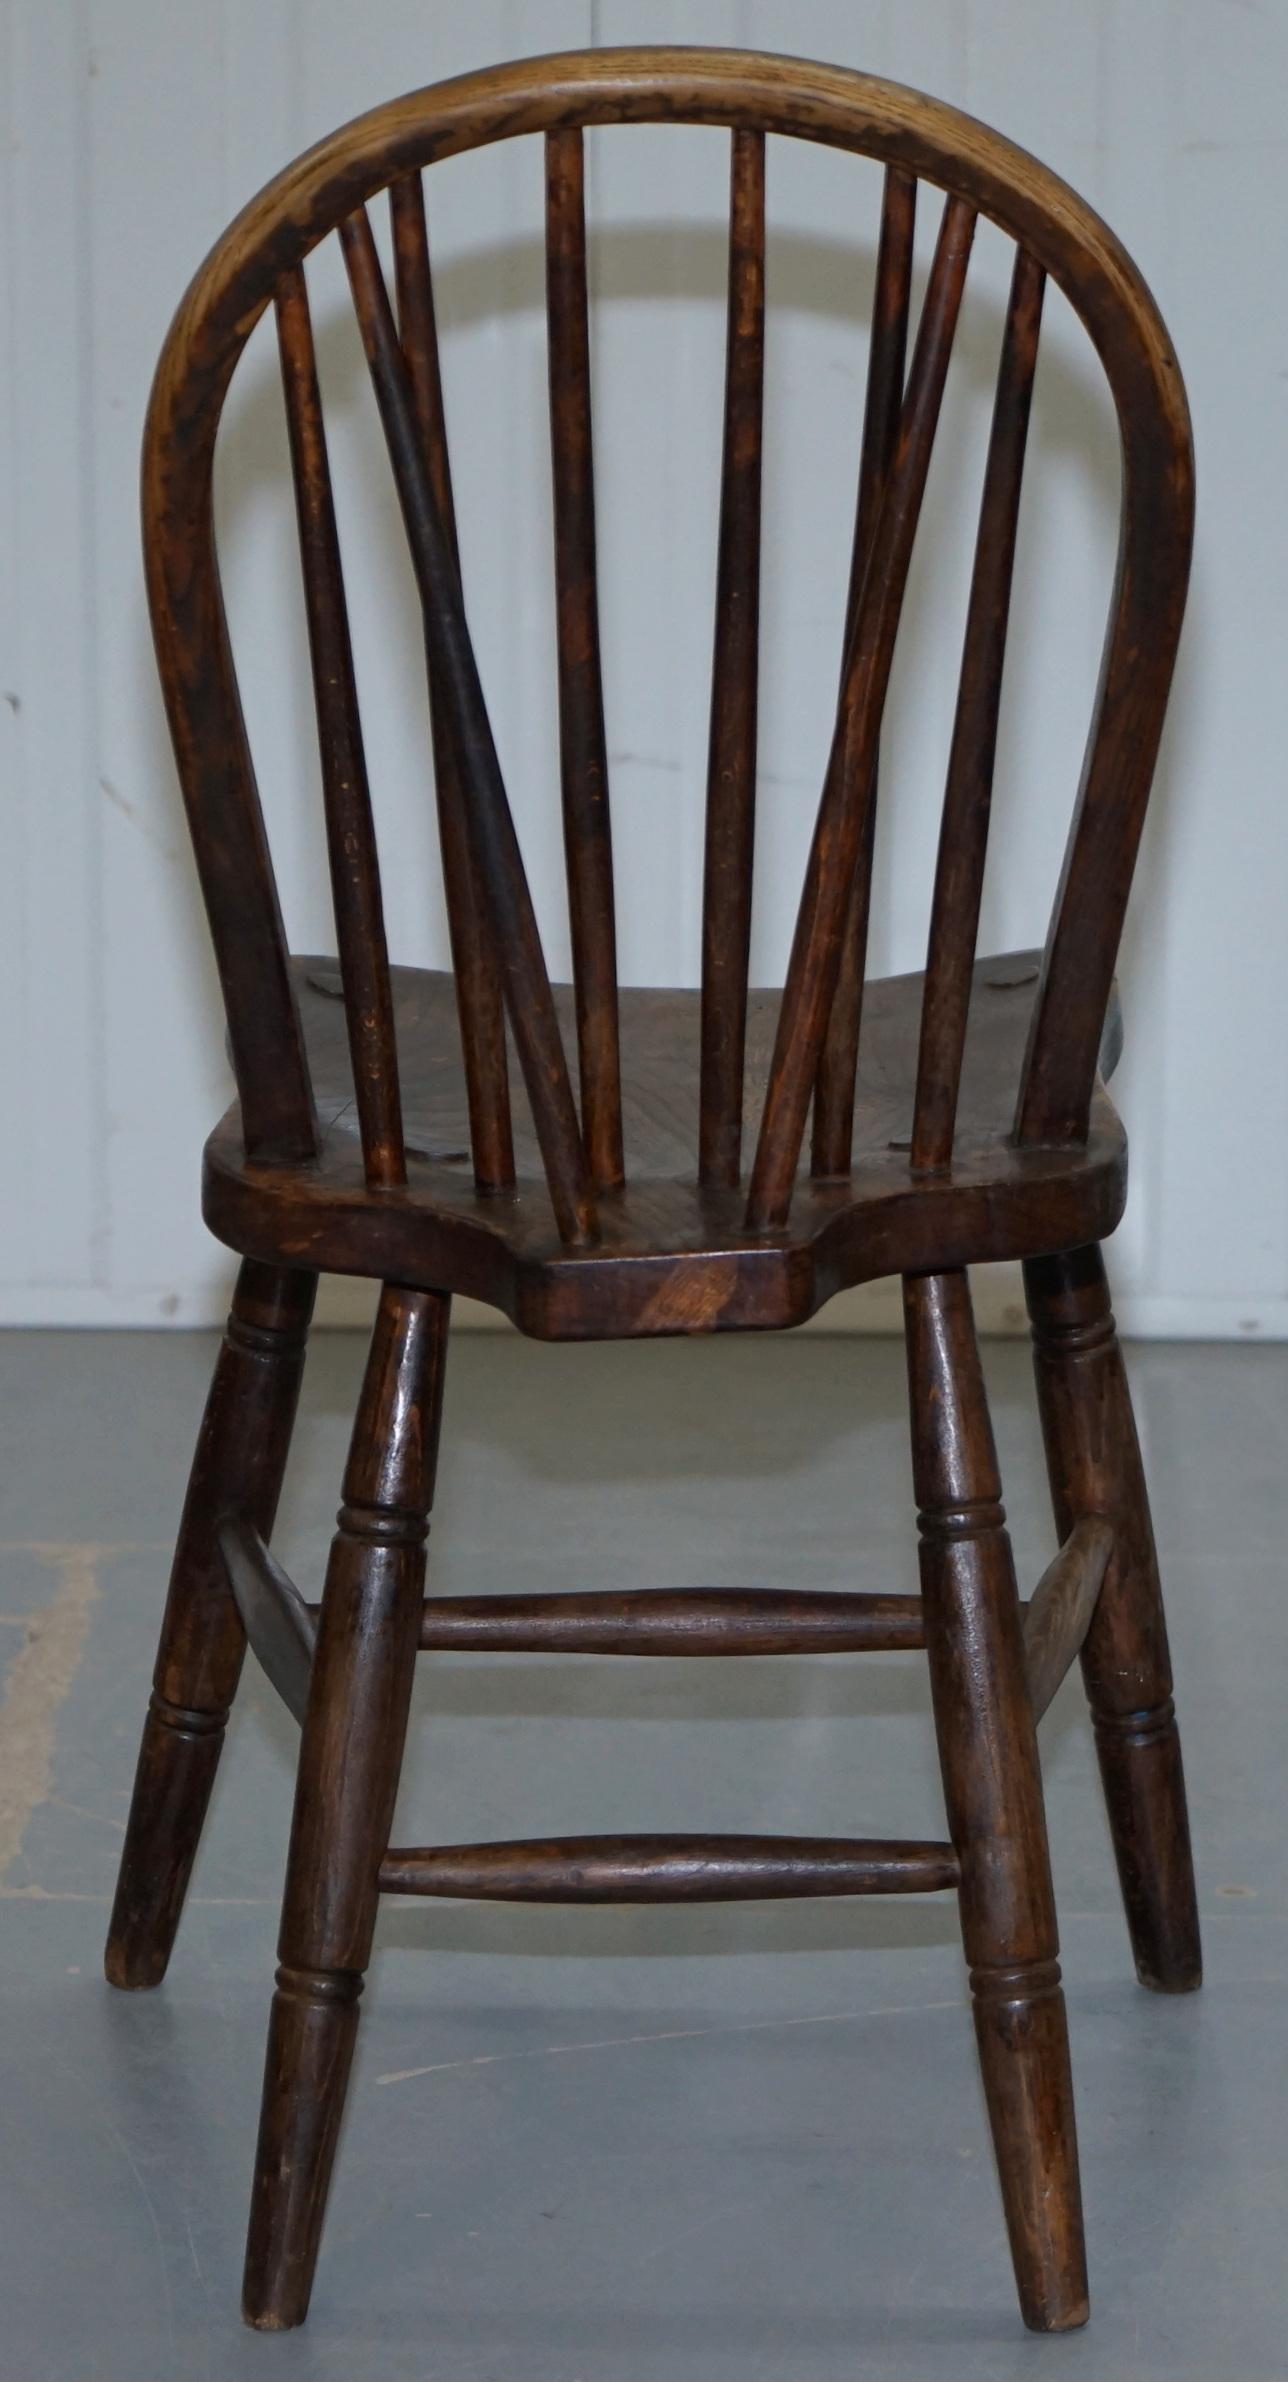 Rare Pair of Fully Stamped Victorian 1840 Hoop Back Windsor Chairs High Wycombe 11